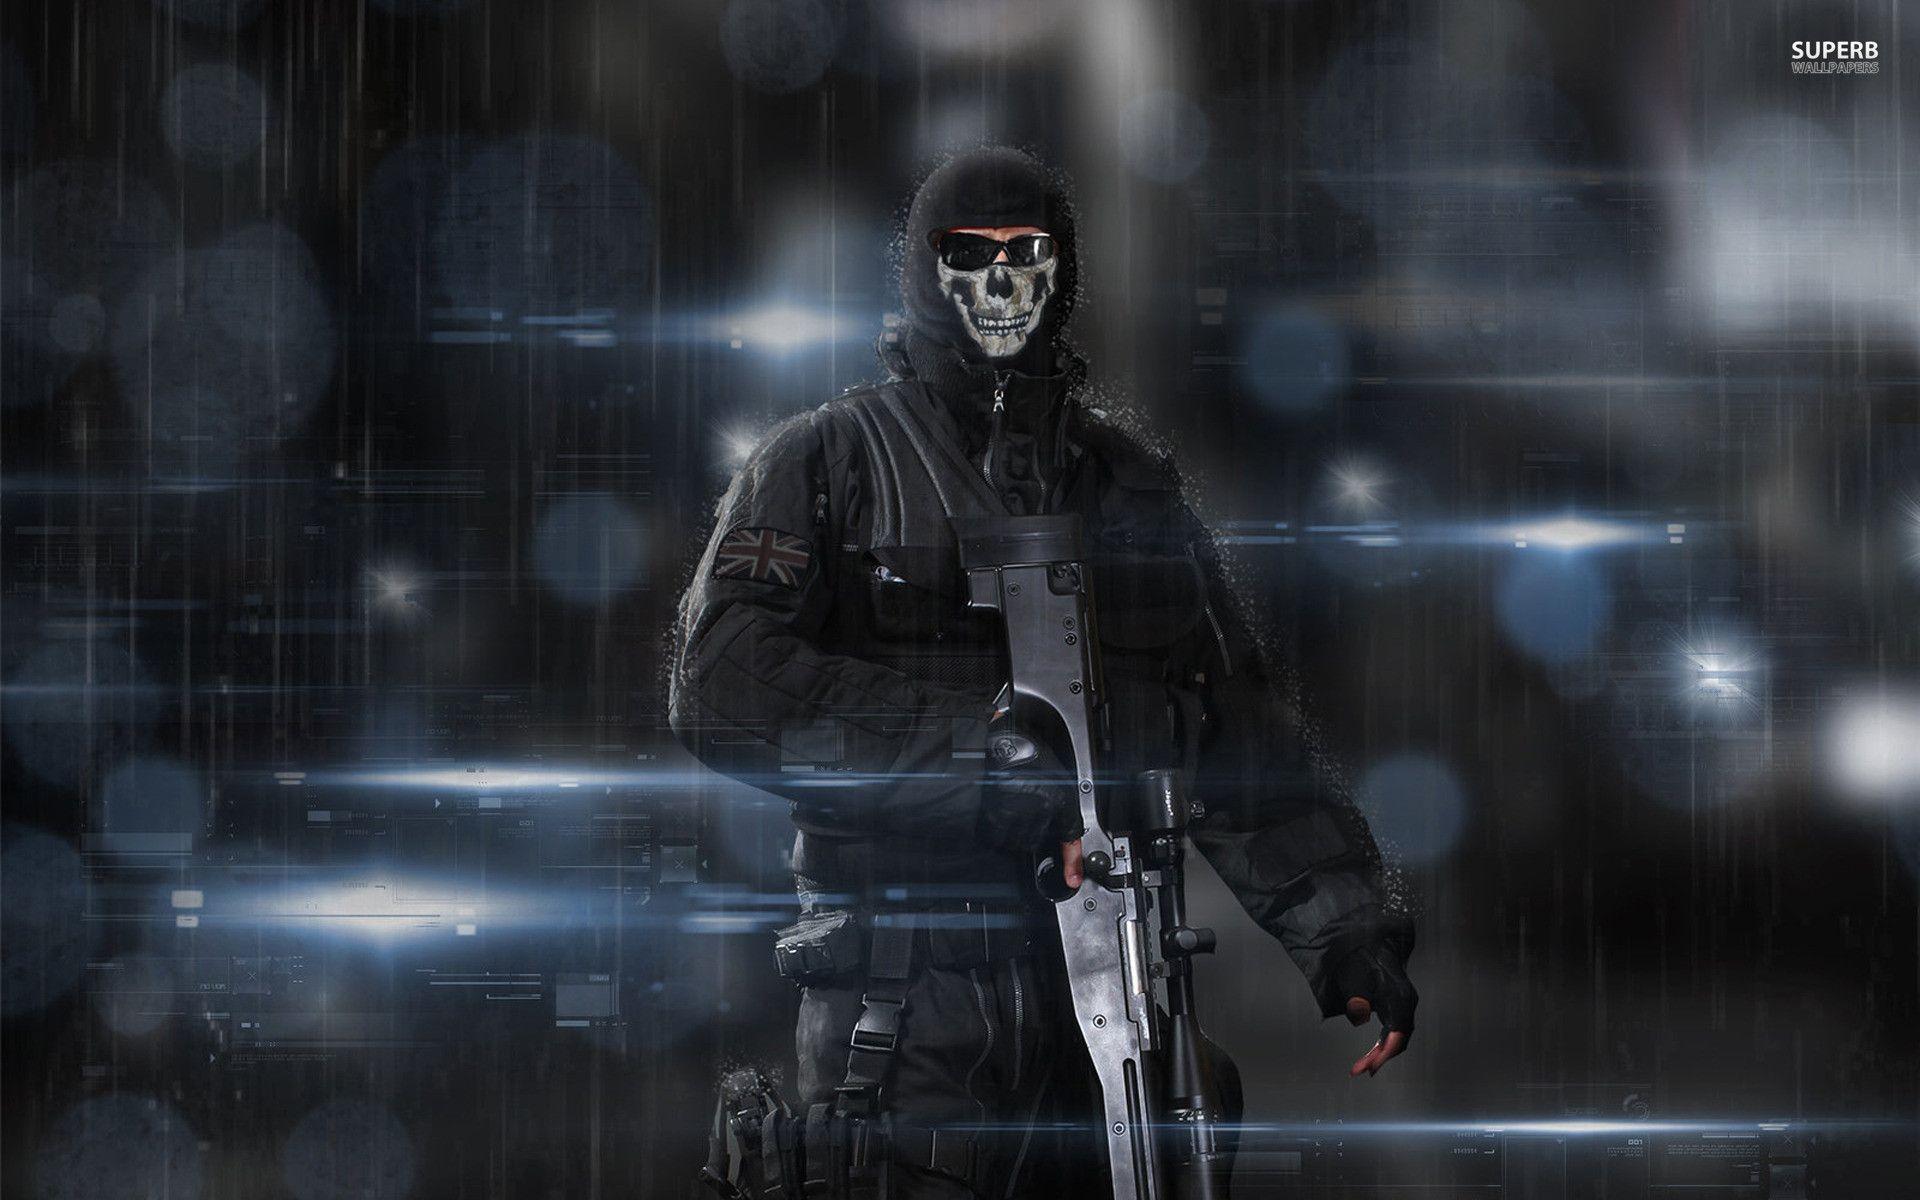 undefined Ghost Image Wallpaper (53 Wallpaper). Adorable Wallpaper. Call of duty ghosts, Call of duty, Ghost image